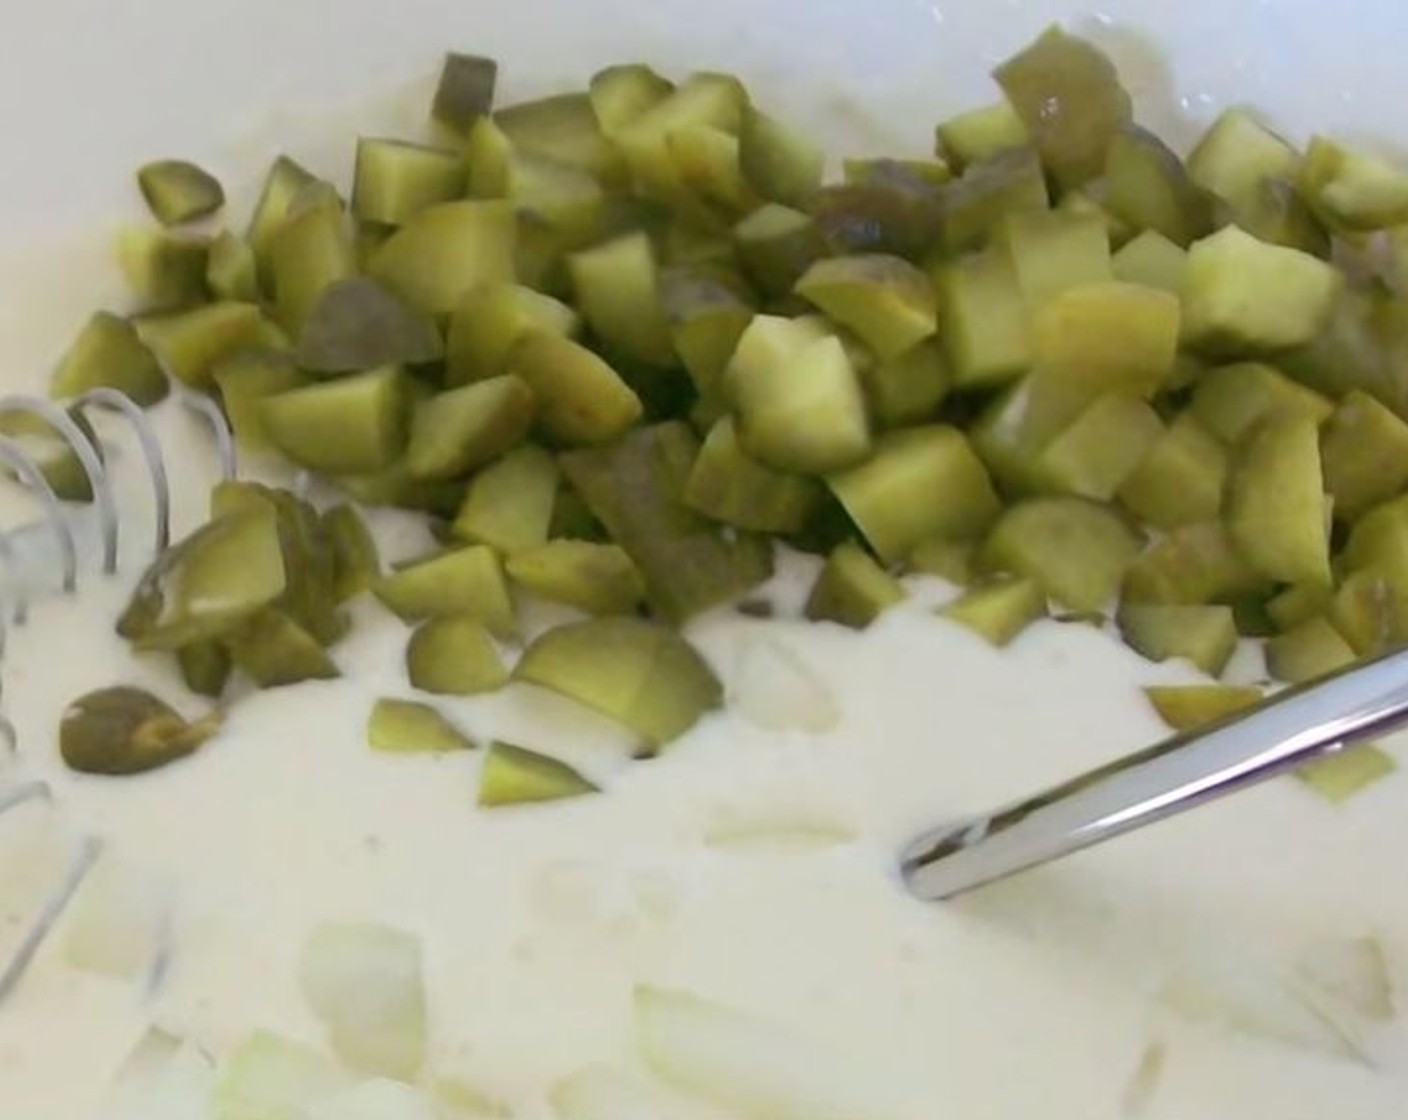 step 2 Into a serving bowl, add Mayonnaise (1 cup) and Pickle Juice (1/2 cup). Whisk until smooth. Add Onion (1) and Dill Pickles (3), then stir to incorporate.